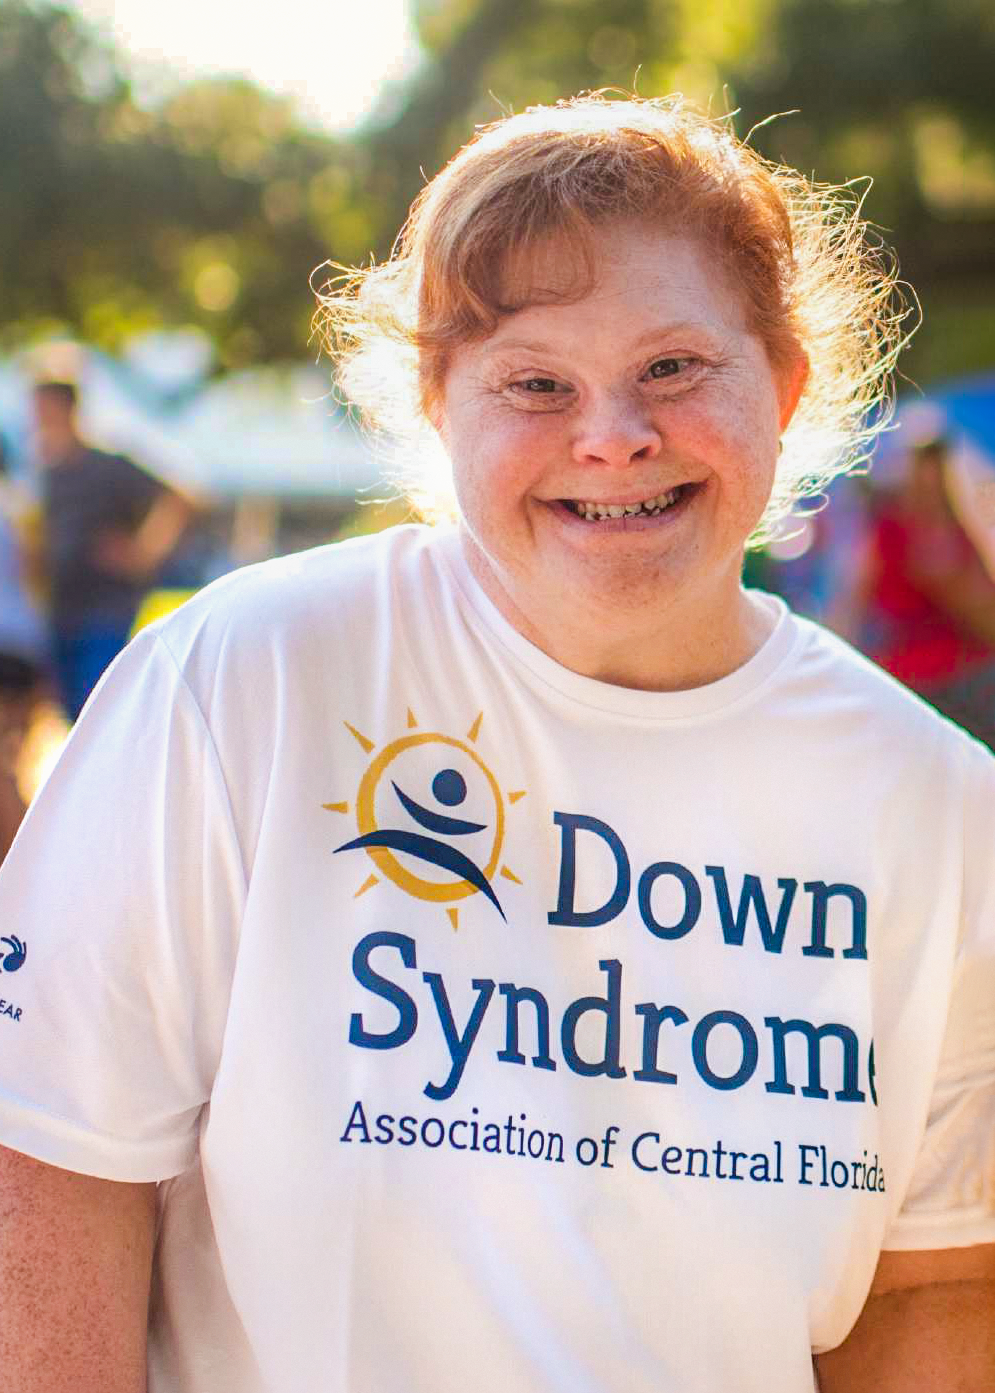 Adult wearing Down Syndrome Shirt, smiling